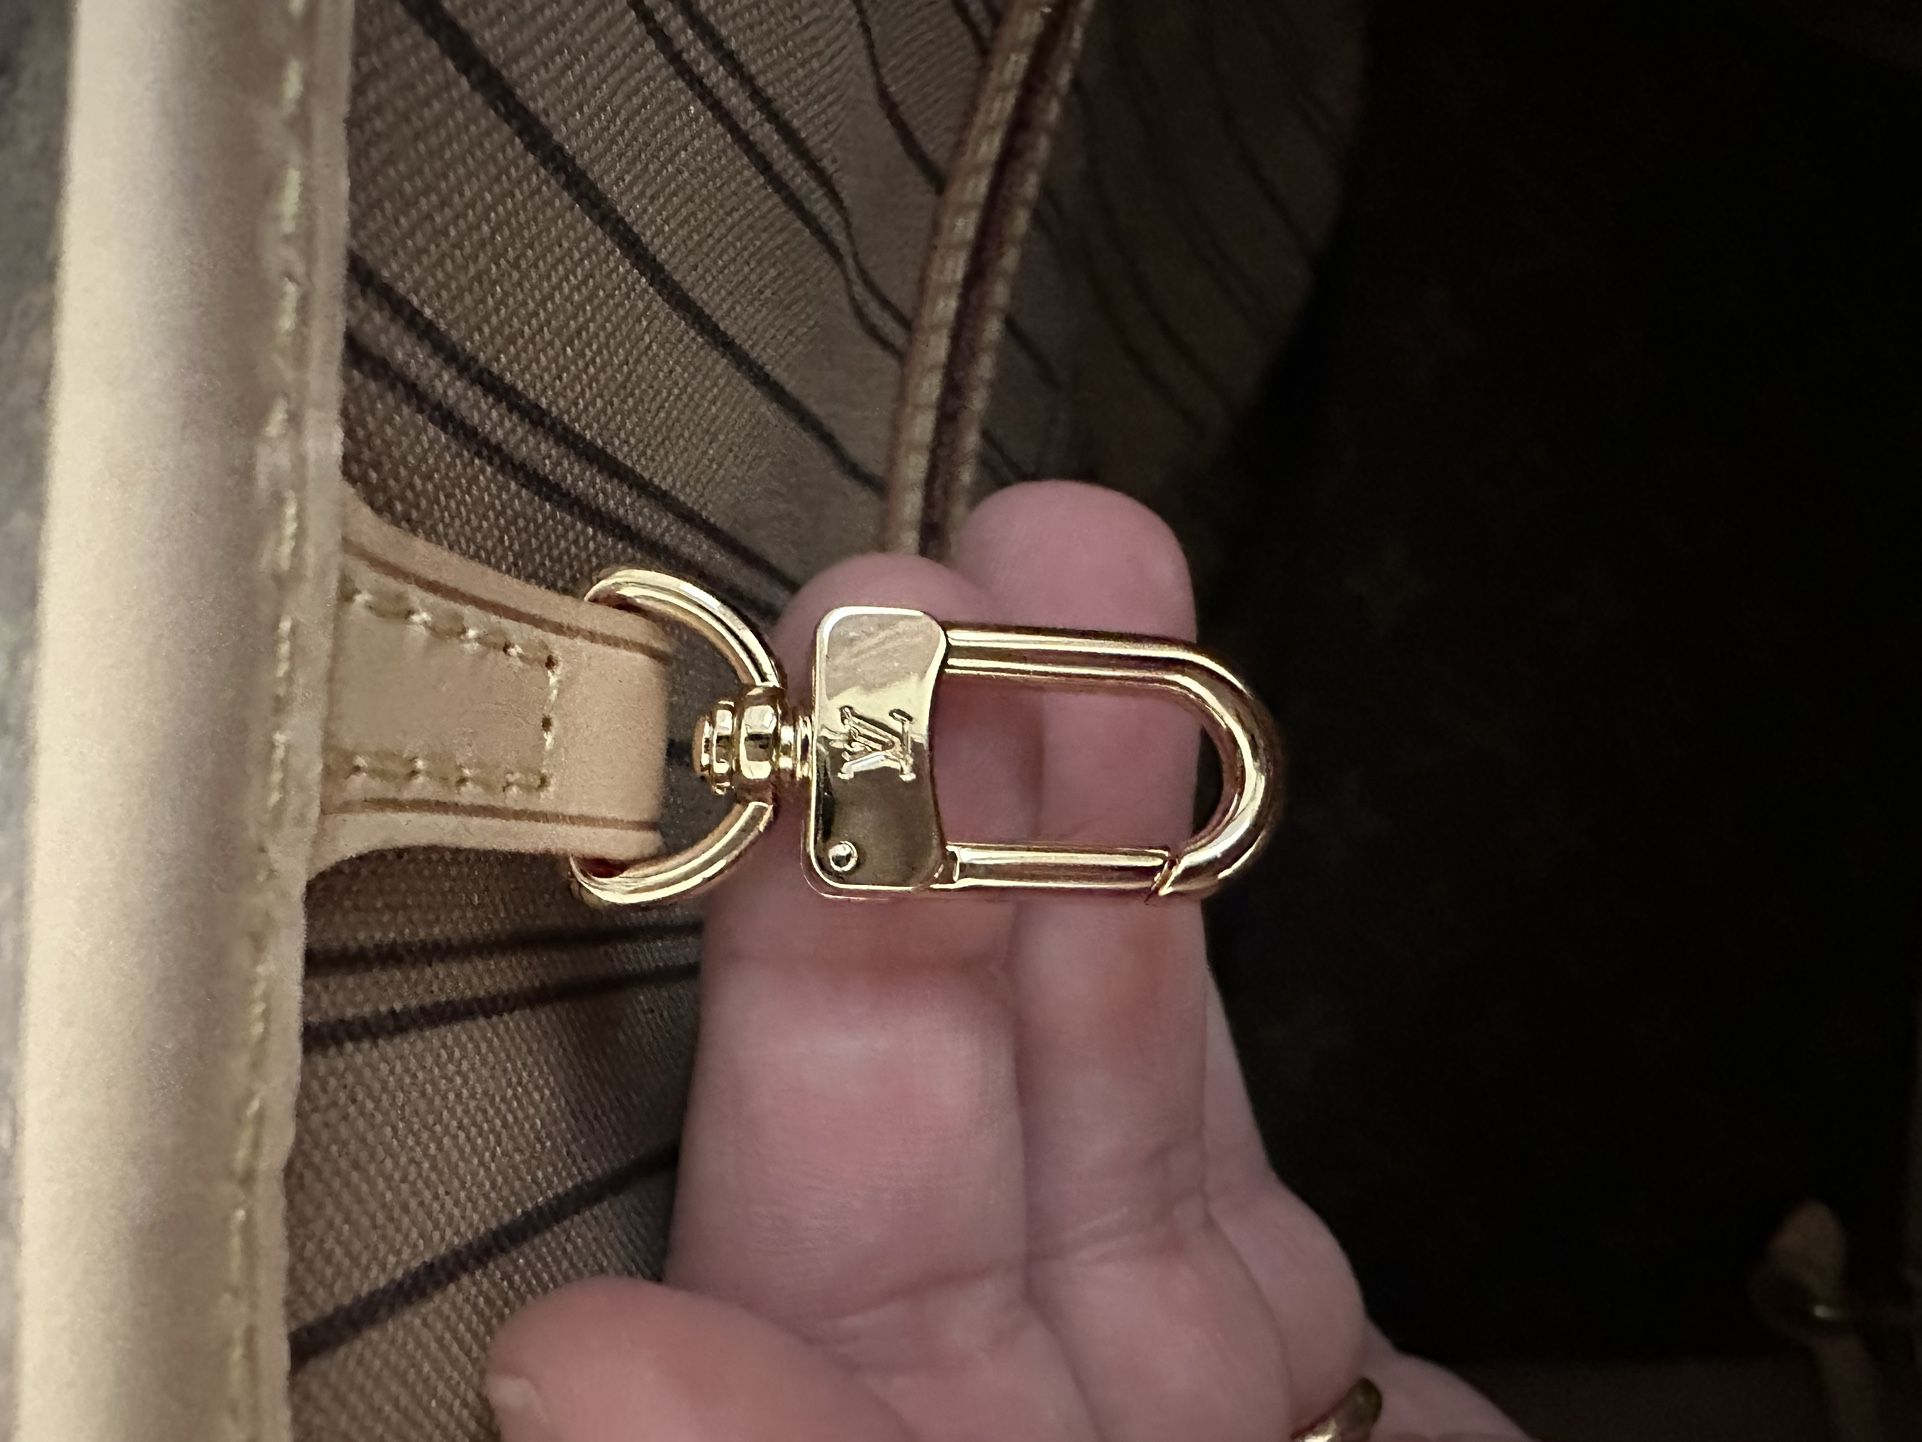 Louis Vuitton Neverfull MM for Sale in Goodyear, AZ - OfferUp